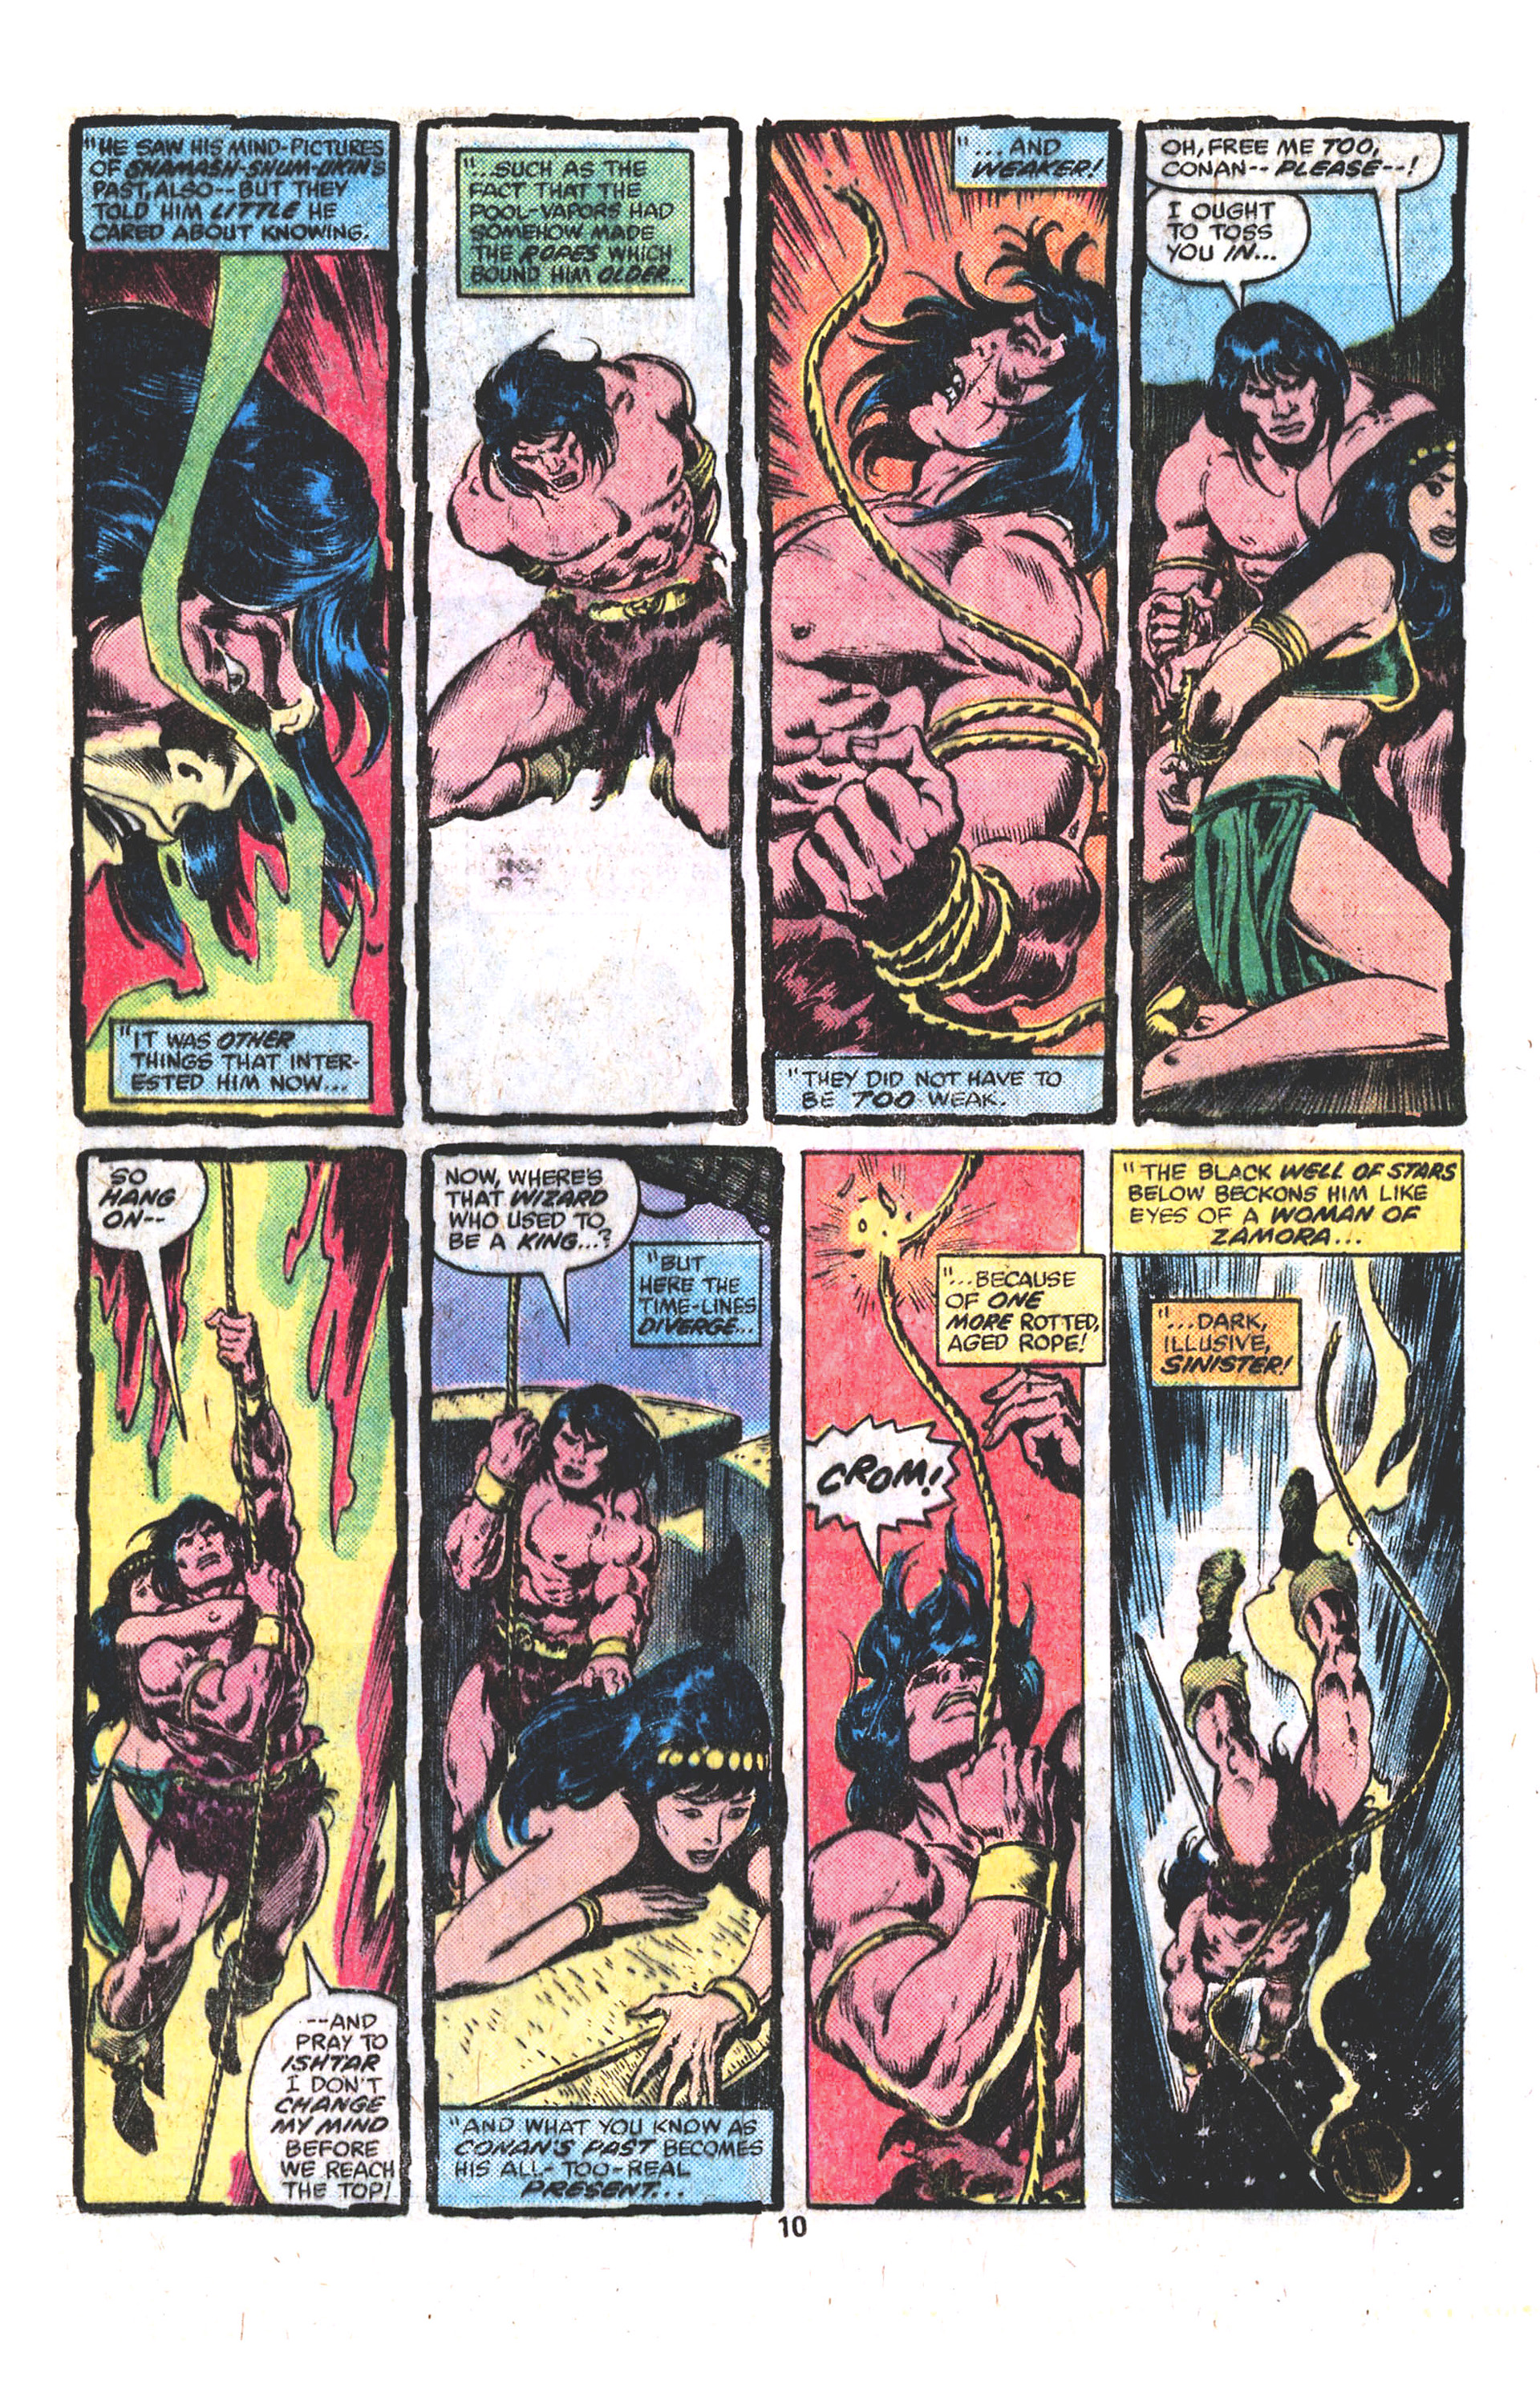 What If? (1977) Issue #13 - Conan The Barbarian walked the Earth Today #13 - English 9